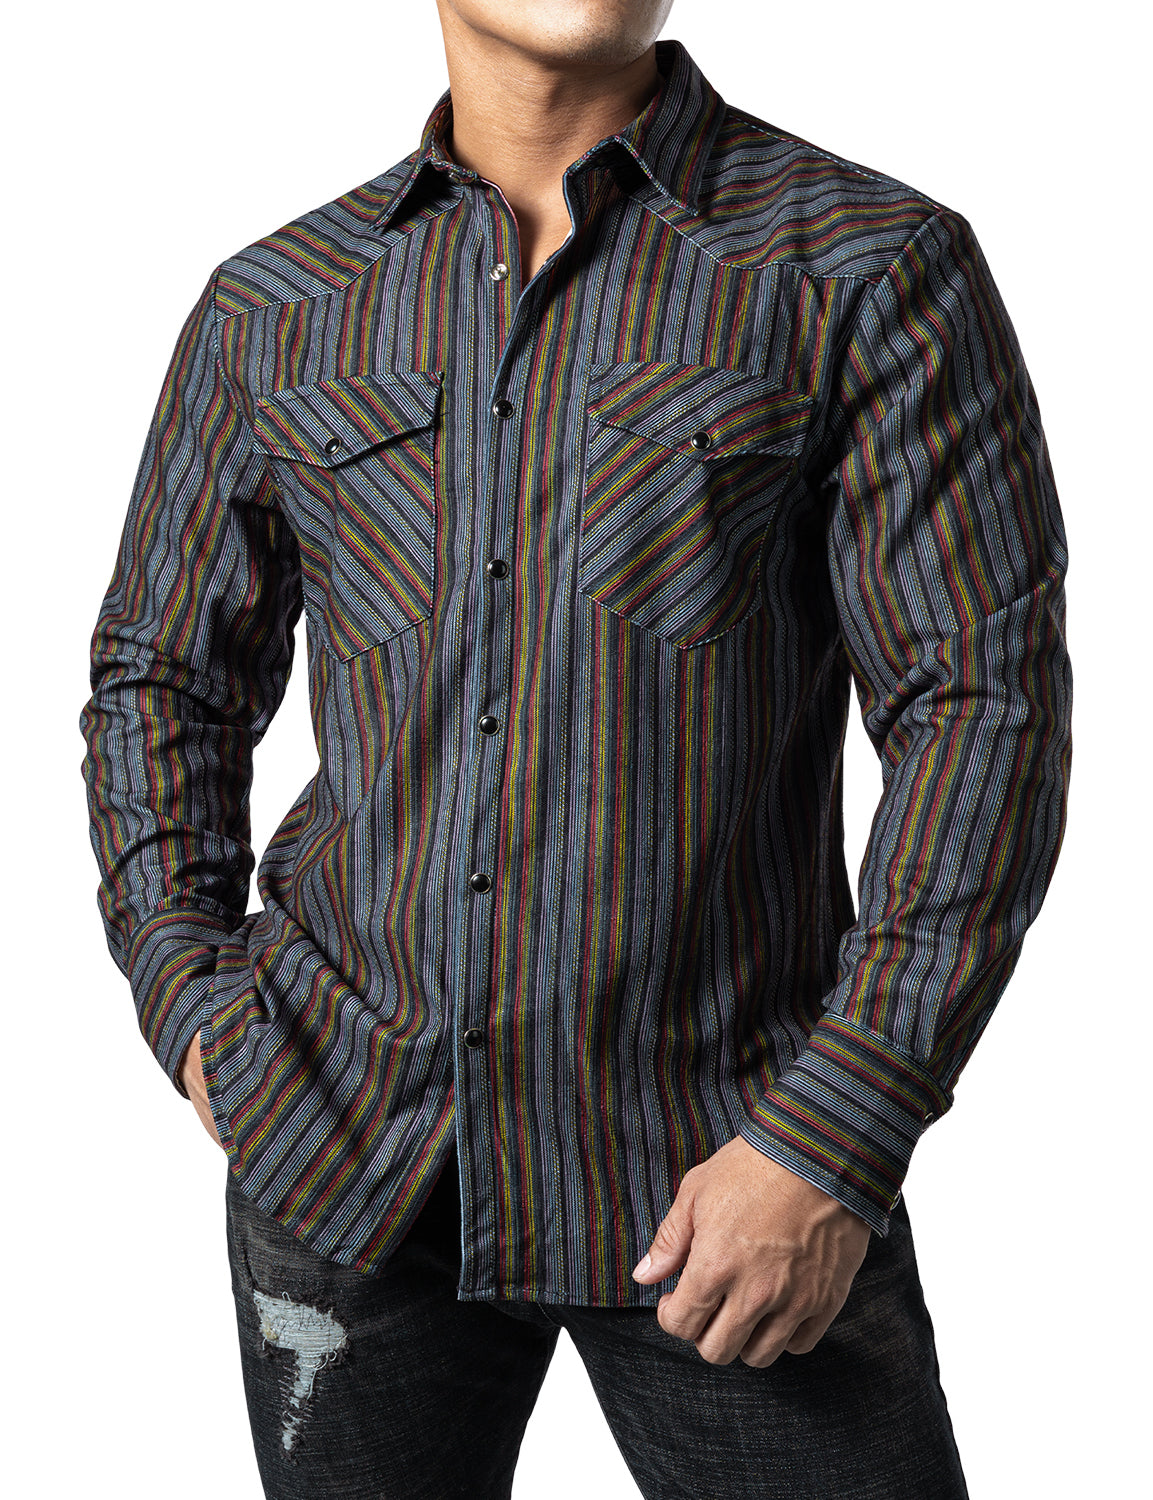 JOGAL Men's Corduroy Shirts Long Sleeve Striped Shacket Jacket with Two Flap Pockets